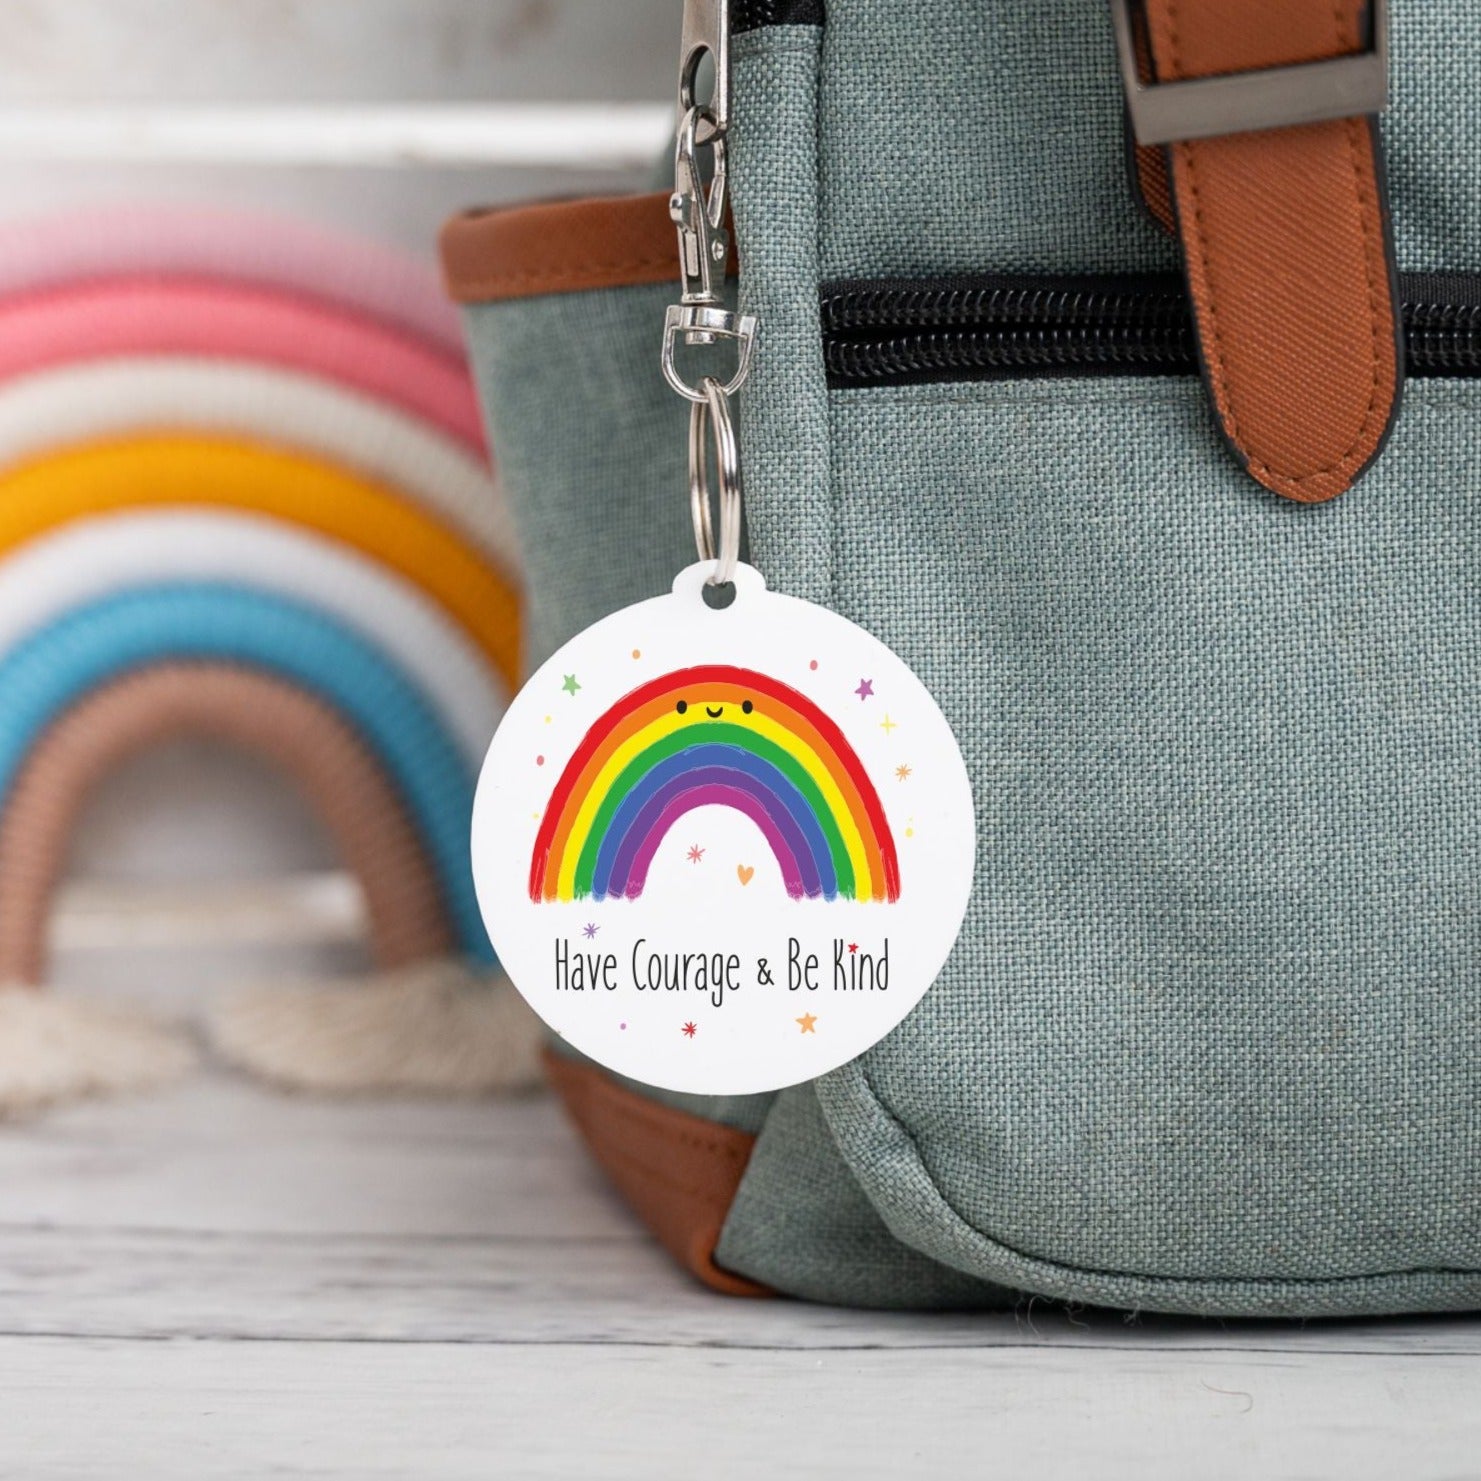 Have Courage & Be Kind Bag Tag